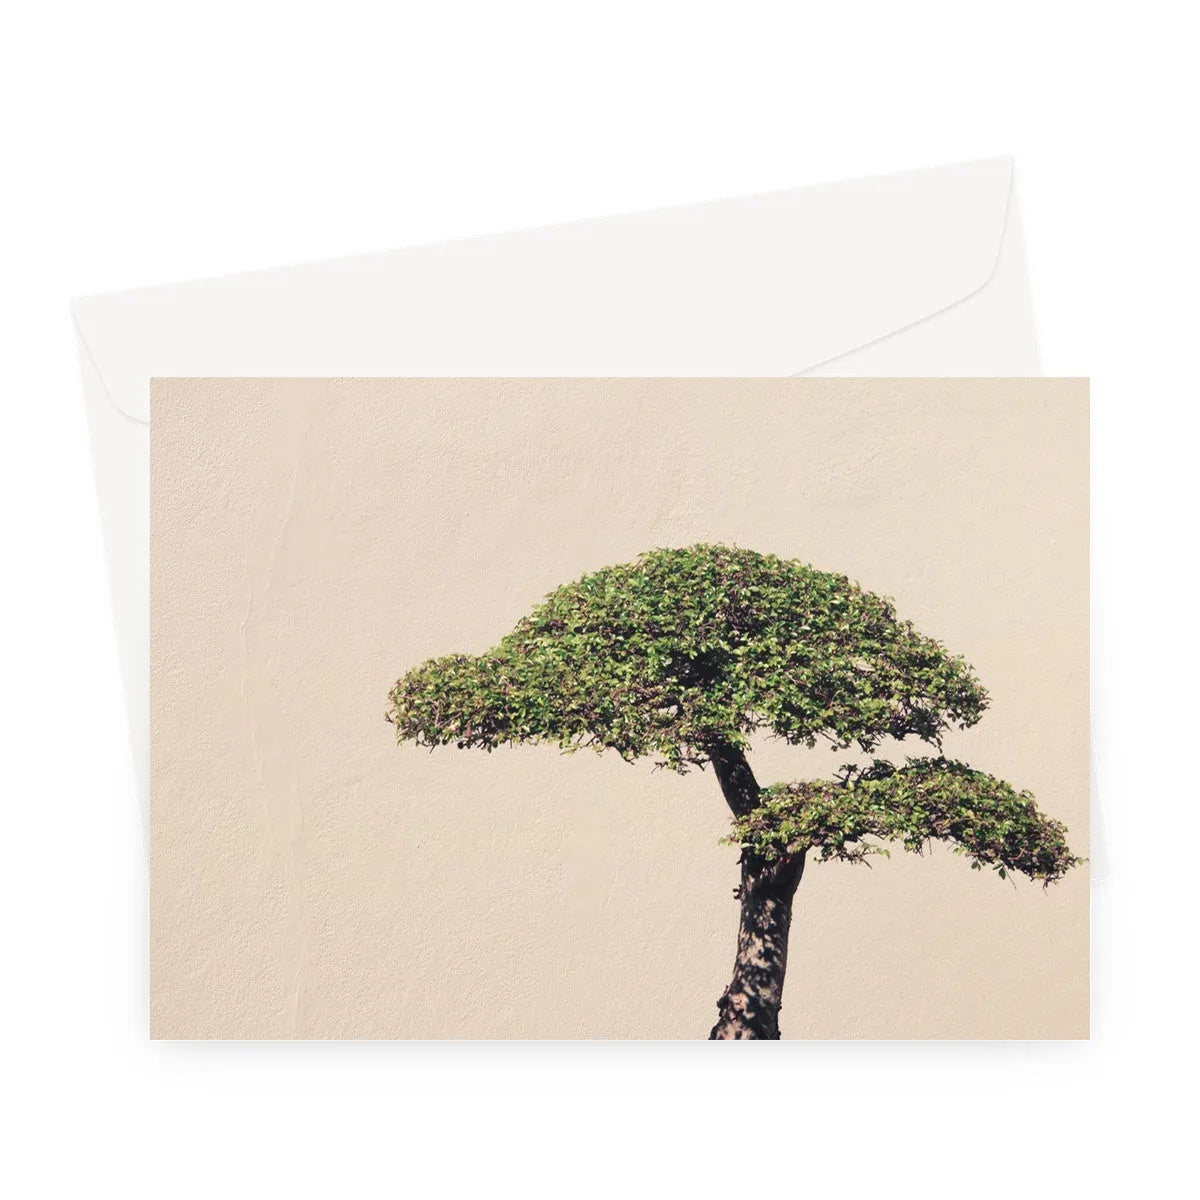 Me Myself And Bonsai Greeting Card - A5 Landscape / 10 Cards - Greeting & Note Cards - Aesthetic Art